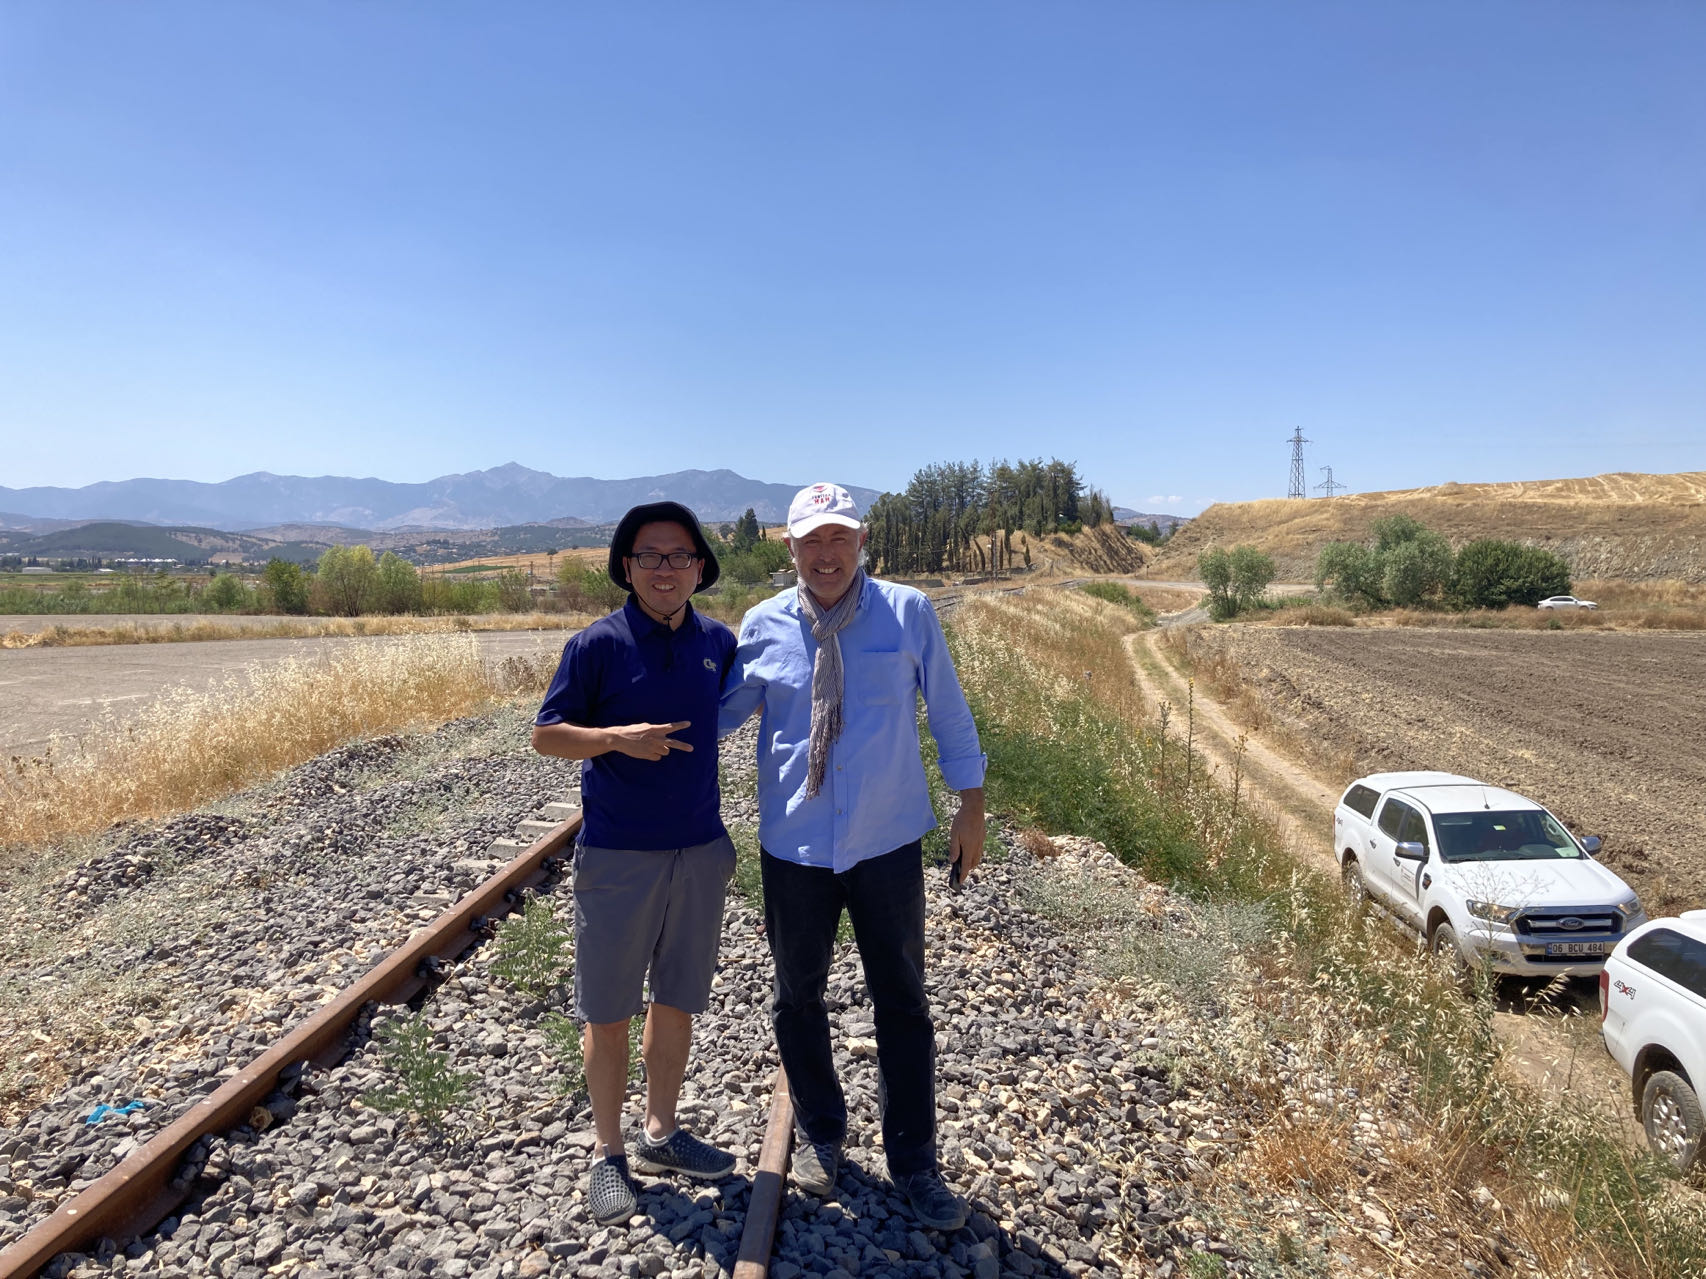 Georgia Tech scientist Zhigang Peng posing with TUBITAK scientist Ekrem Zor right in front of a possible surface rupture produced by the 2023 magnitude 7.8 earthquake